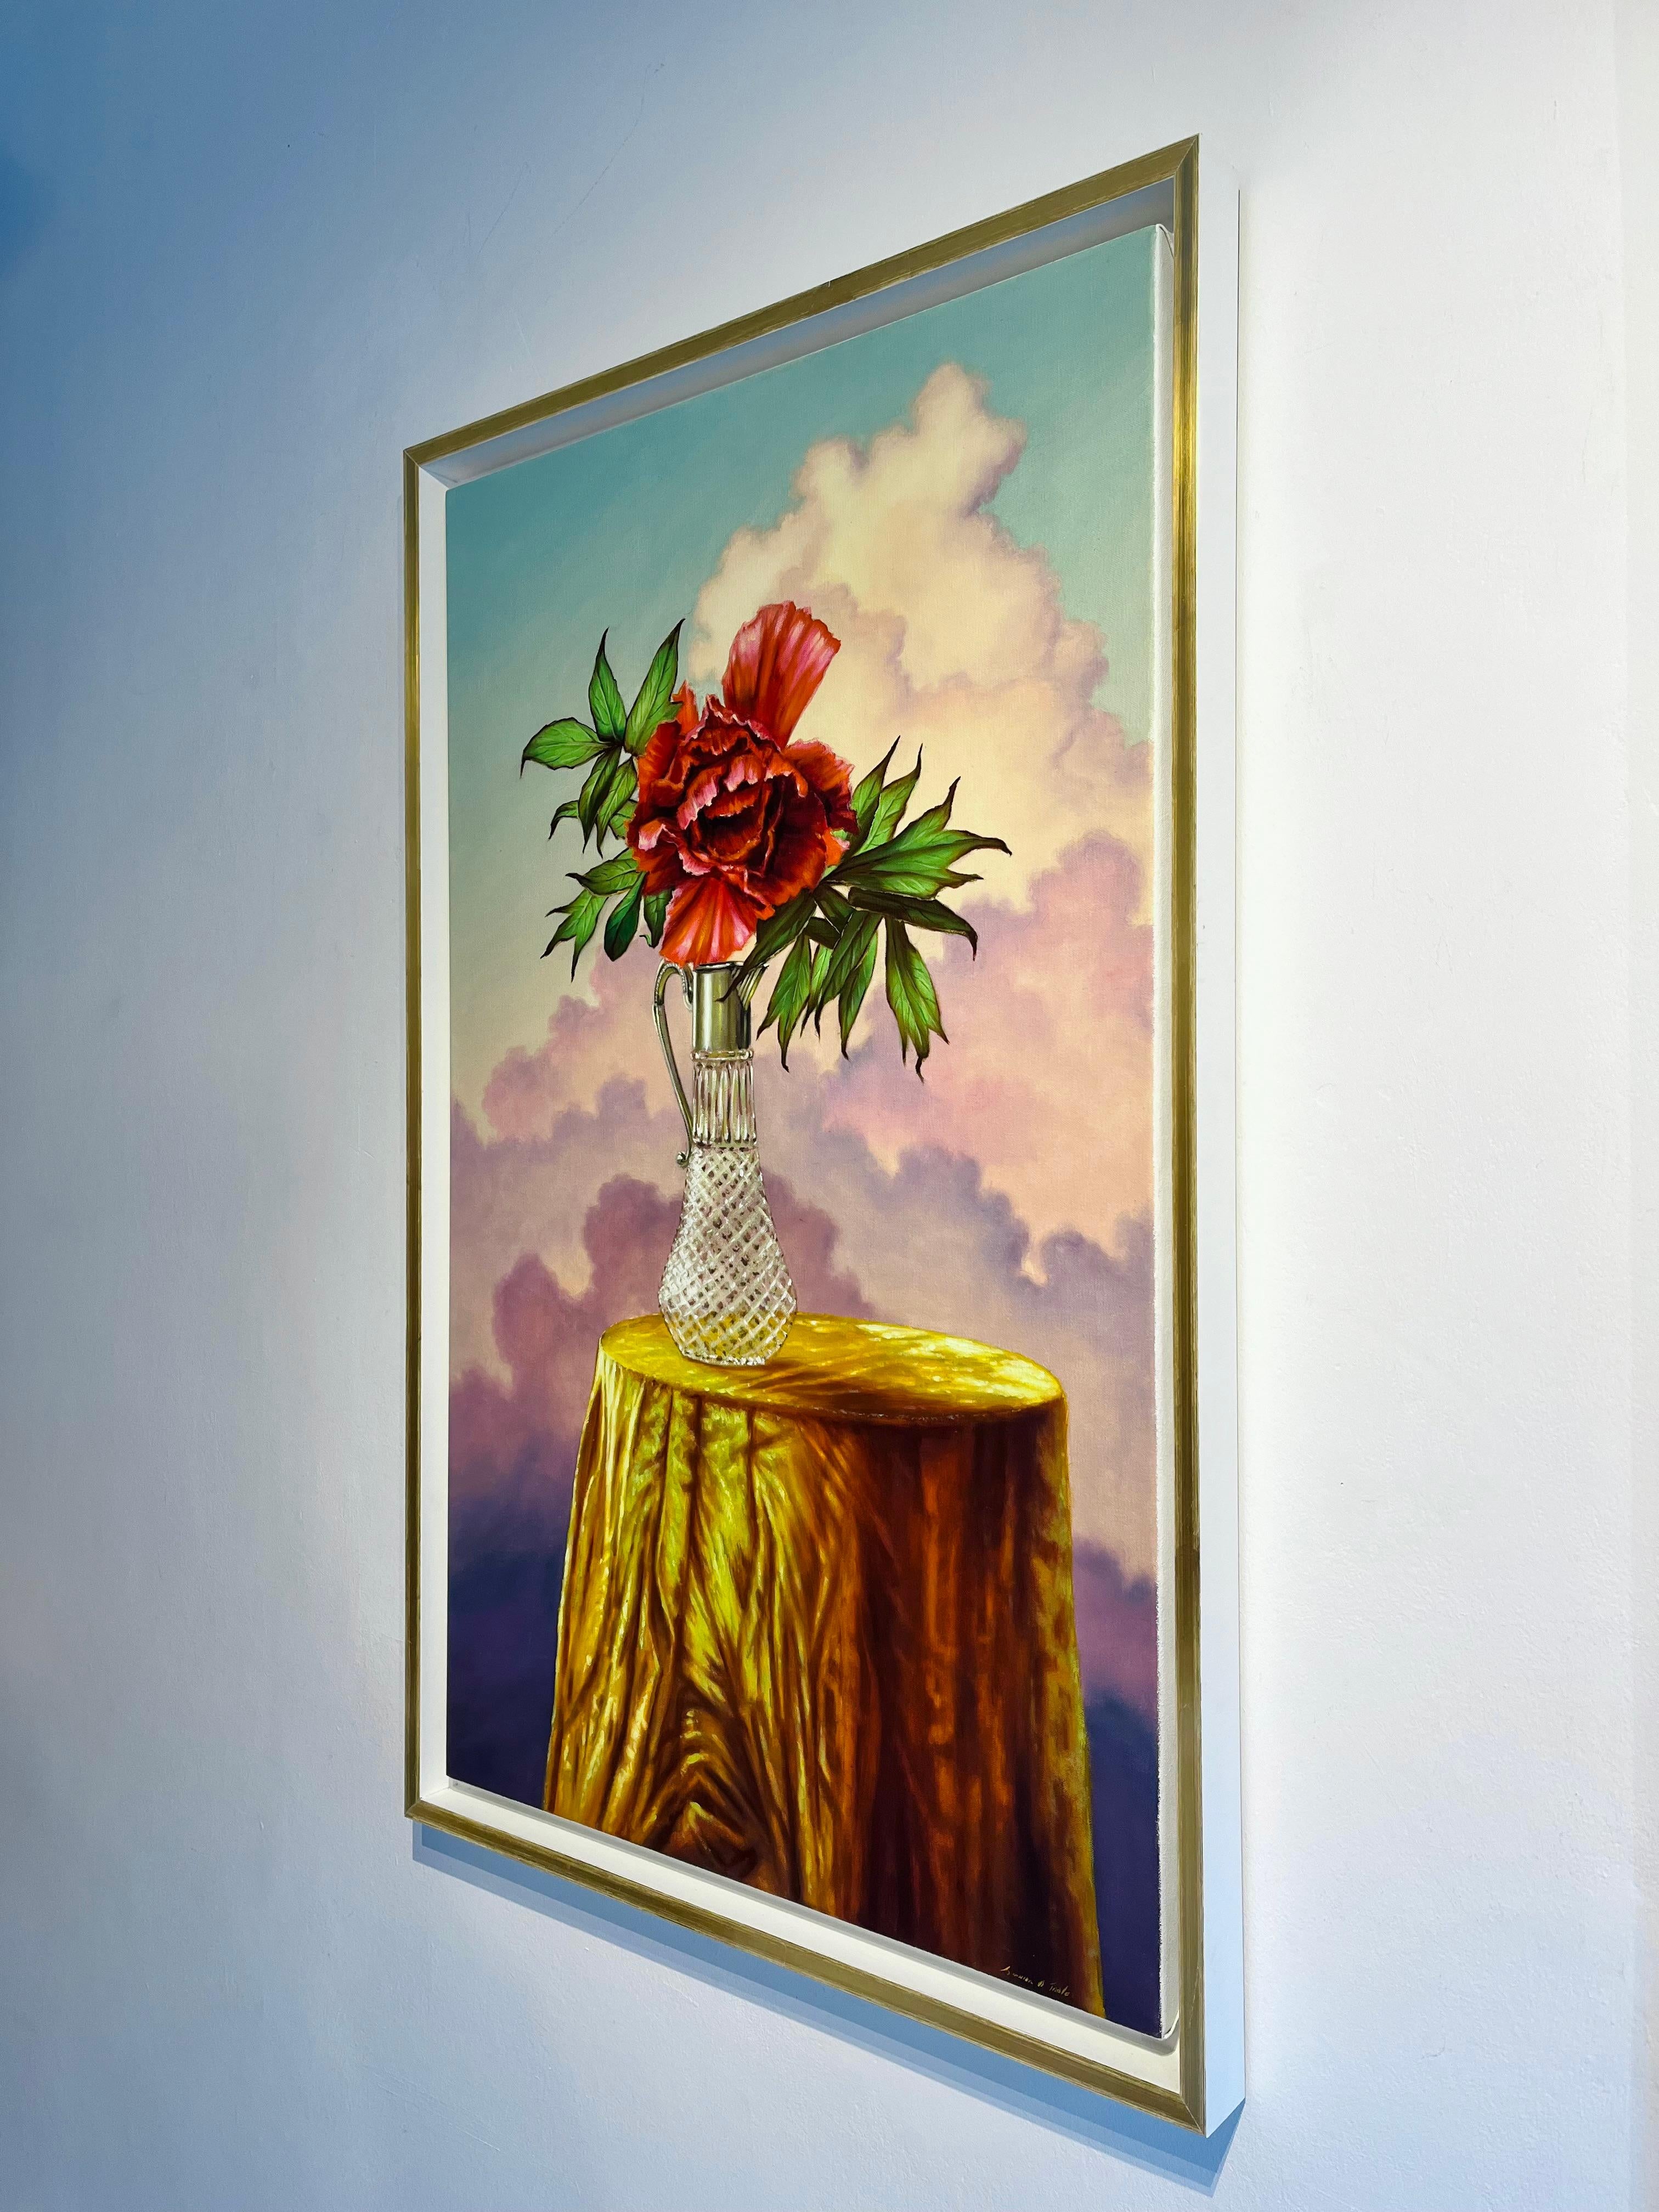 It's the Perfect Day, but It's Getting Late - realism surrealistic oil painting - Surrealist Painting by Laurence O'Toole